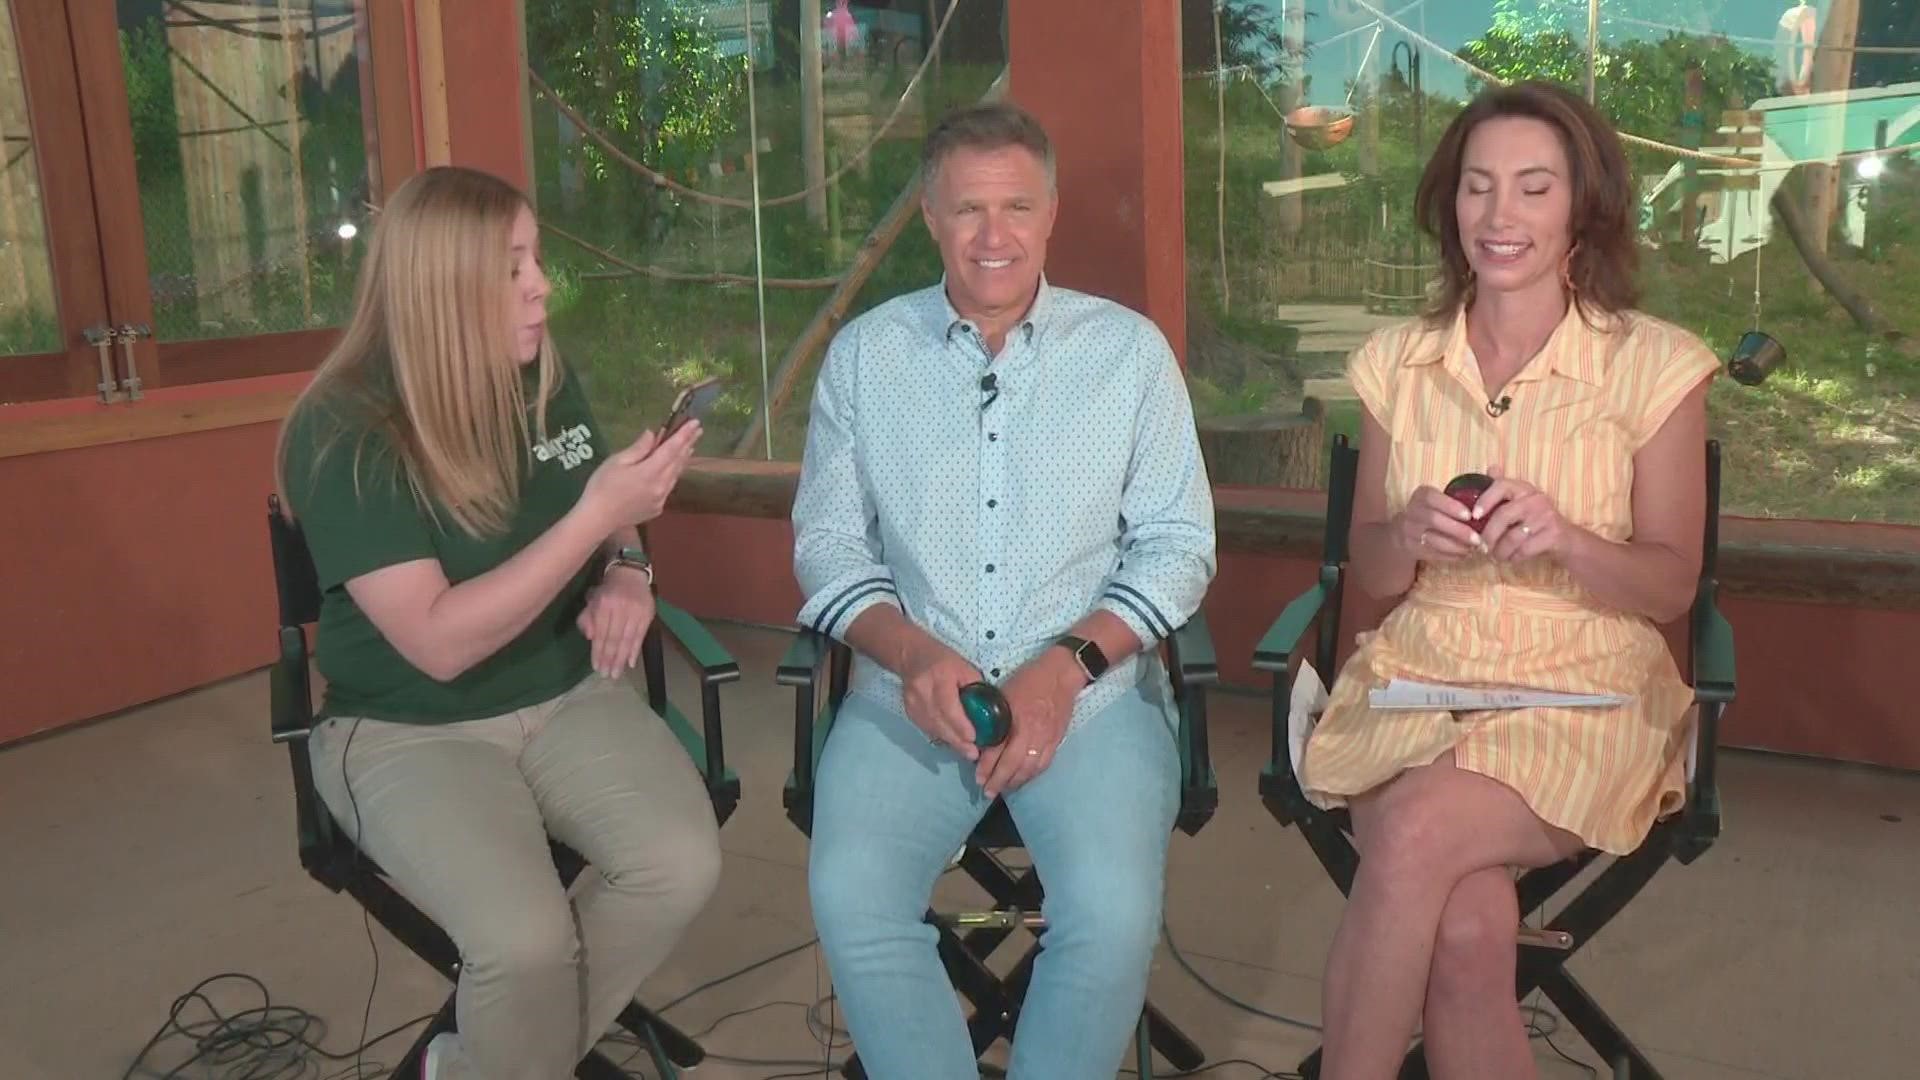 For this week's Throwdown Thursday, 3News anchors Jay Crawford and Betsy Cling go head-to-head over some animal trivia, with help from Elena at the Akron Zoo.